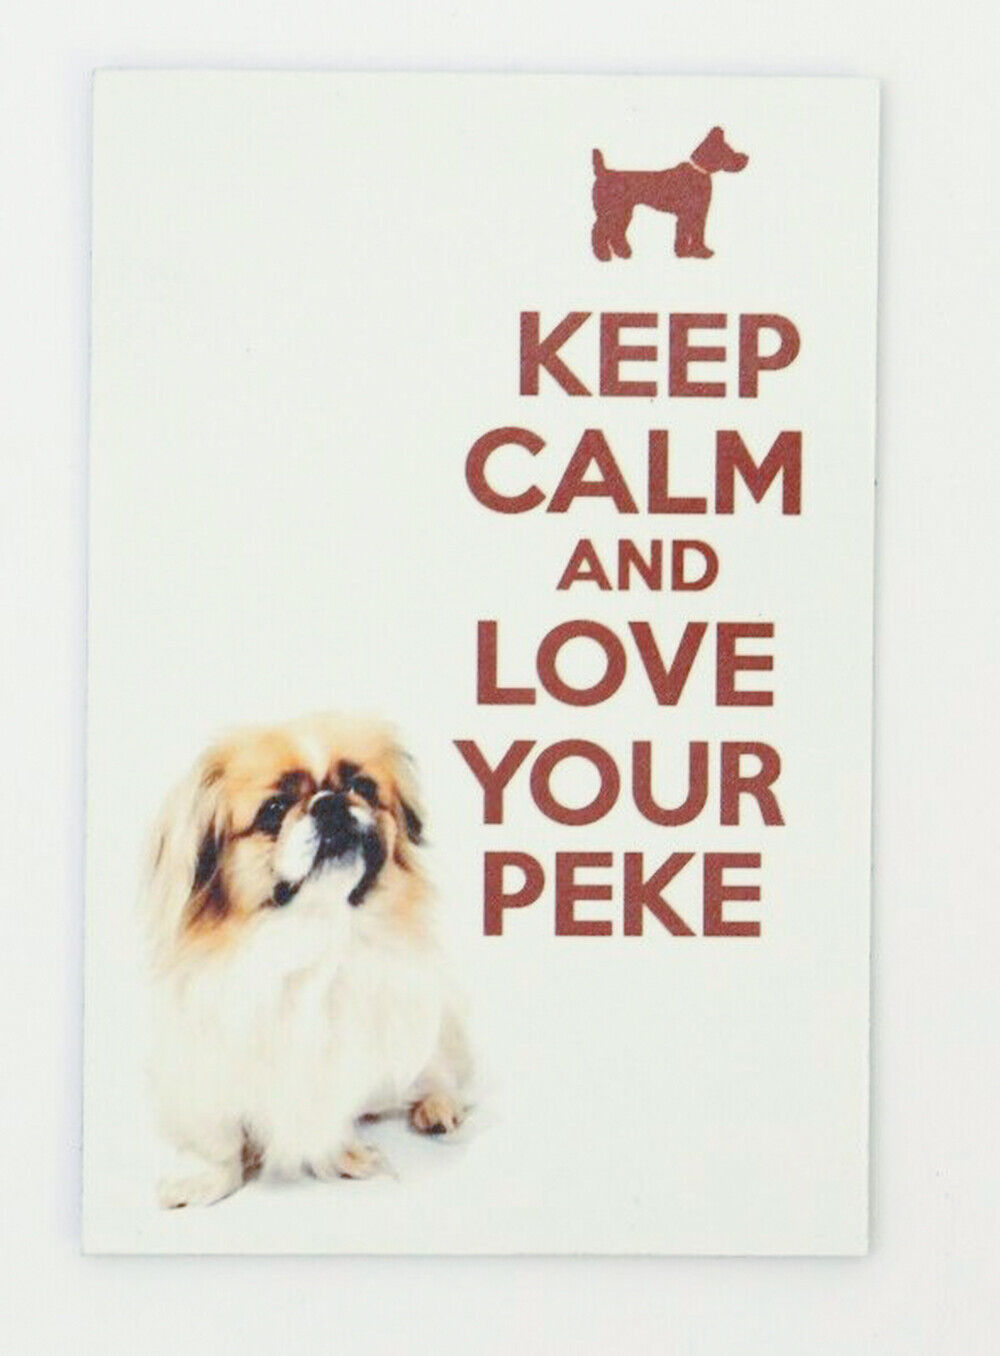 KEEP CLAM LOVE PEKE pic Design Vintage Poster Magnet Fridge Collectibles Home